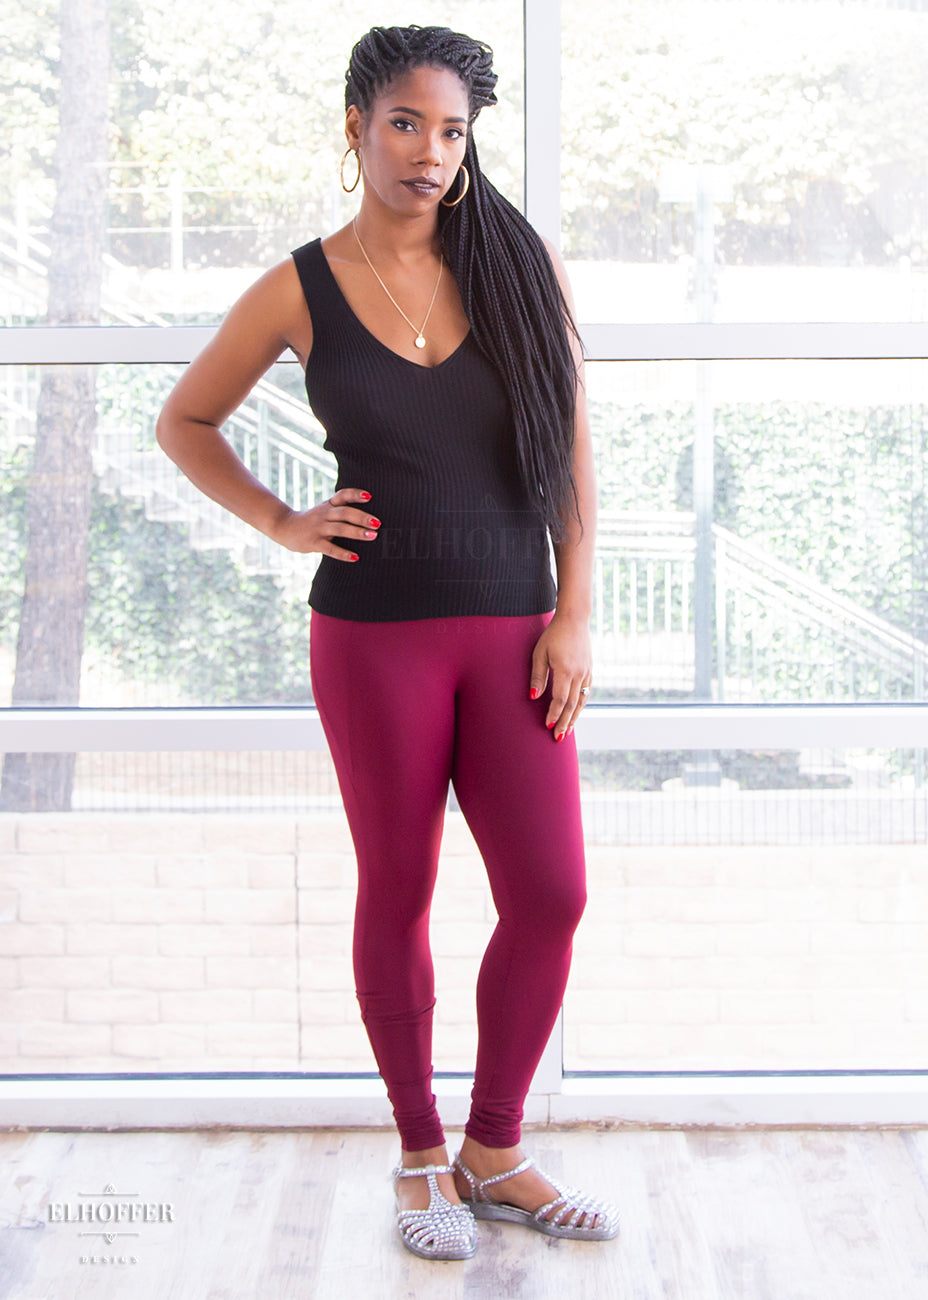 Krystina, a size small medium dark skinned model with long braids, wearing a high-waisted full length fitted legging with side pockets built into the seamwork and a seamless front in a beautiful burgundy color. She has paired them with a black knit Gemini top. 